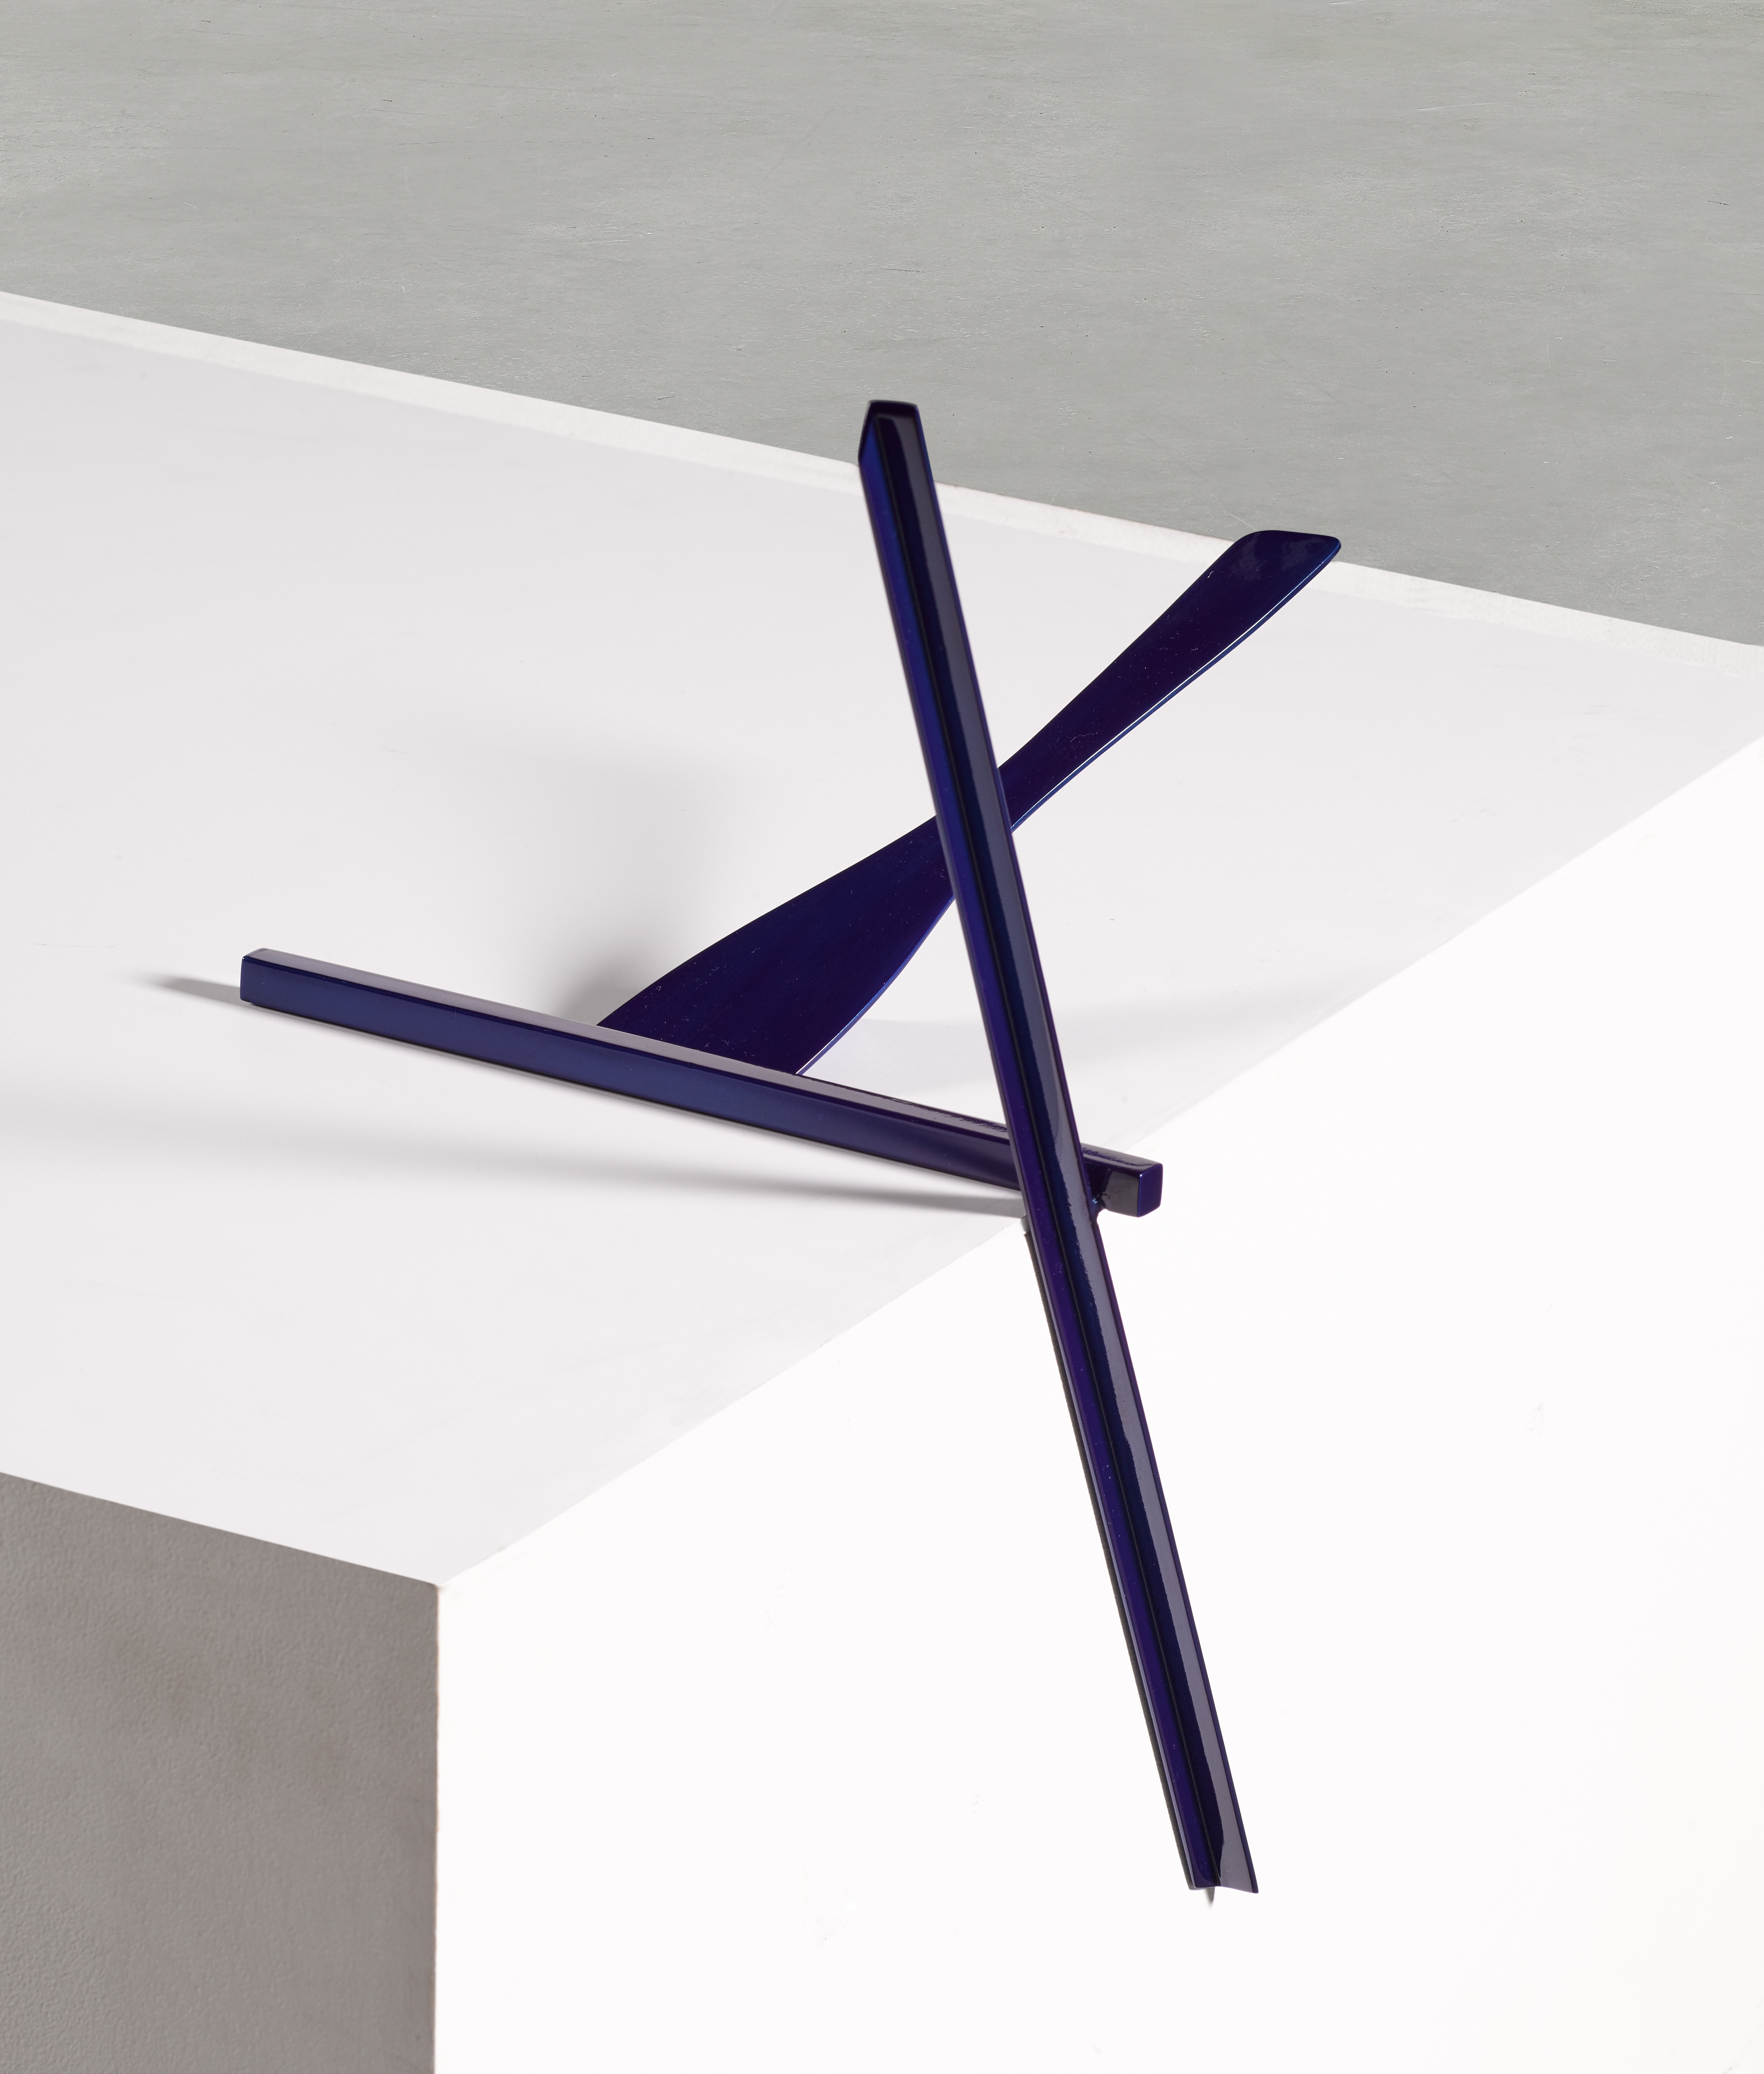 Table Piece IV by Anthony Caro, Executed in 1966